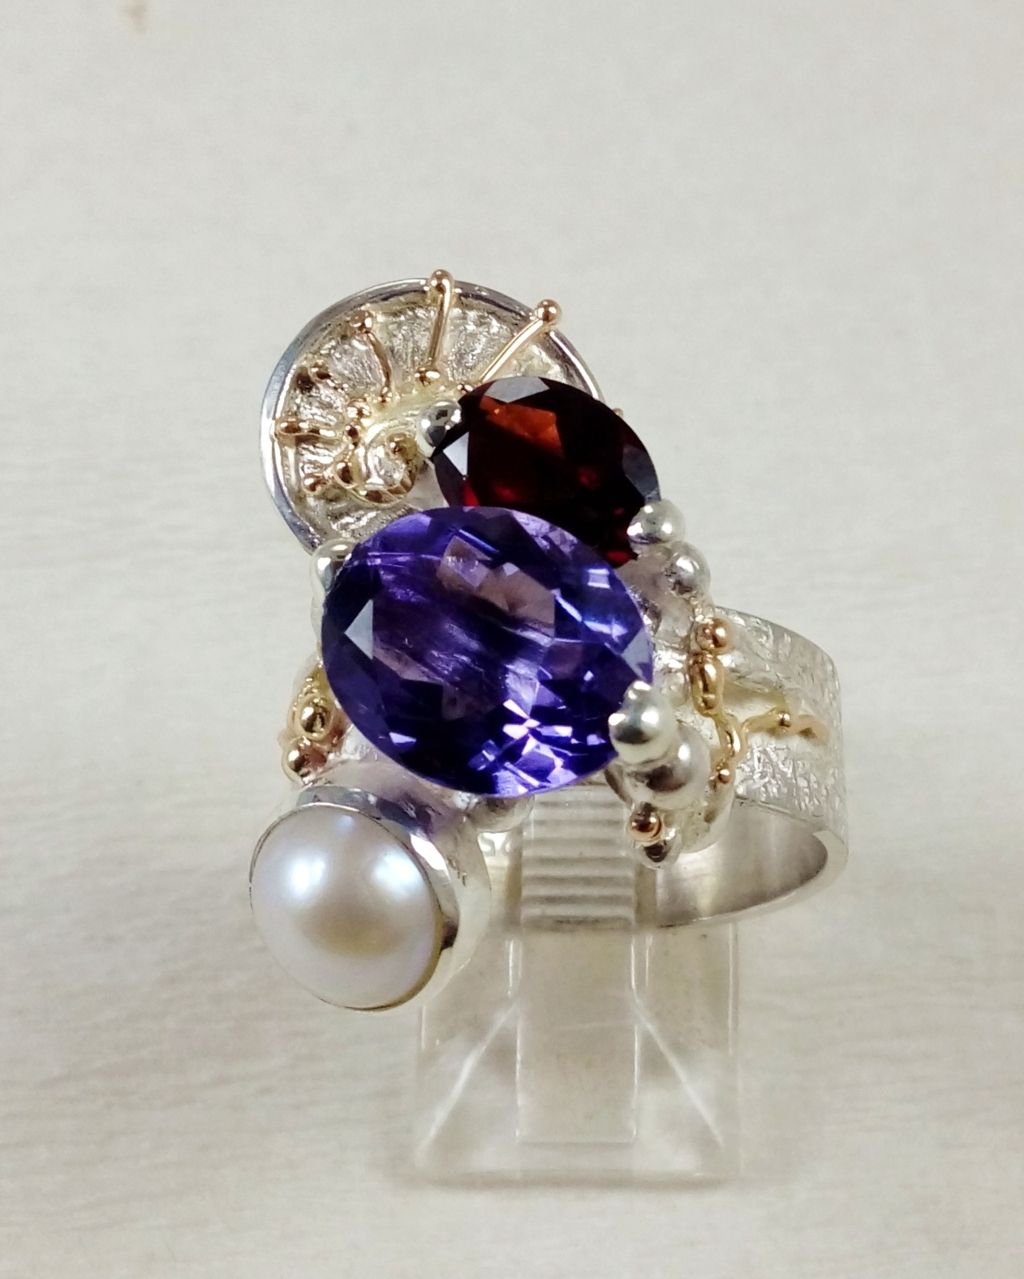 Gregory Pyra Piro ring 3035, Gregory Pyra Piro art jewellery, art nouveau inspired art, one of a kind jewellery with amethyst and garnet, handcrafted jewellery with gemstones and pearls, who still makes one of a kind jewelry, jewellery sold in art galleries, jewellery sold in craft galleries, mixed metal jewellery with gemstones and pearls, artists during lockdown, where do I find still active vintage jewelry artists, how do I find vinatage designers and artists that are still active, where tojewelry with retro style for my grandmotherjewellery online, where to find vintage jewelry artist that is still active, where to find fine craft product styles from the 80s and 90s, buy fine craft online, rings made during lockdown